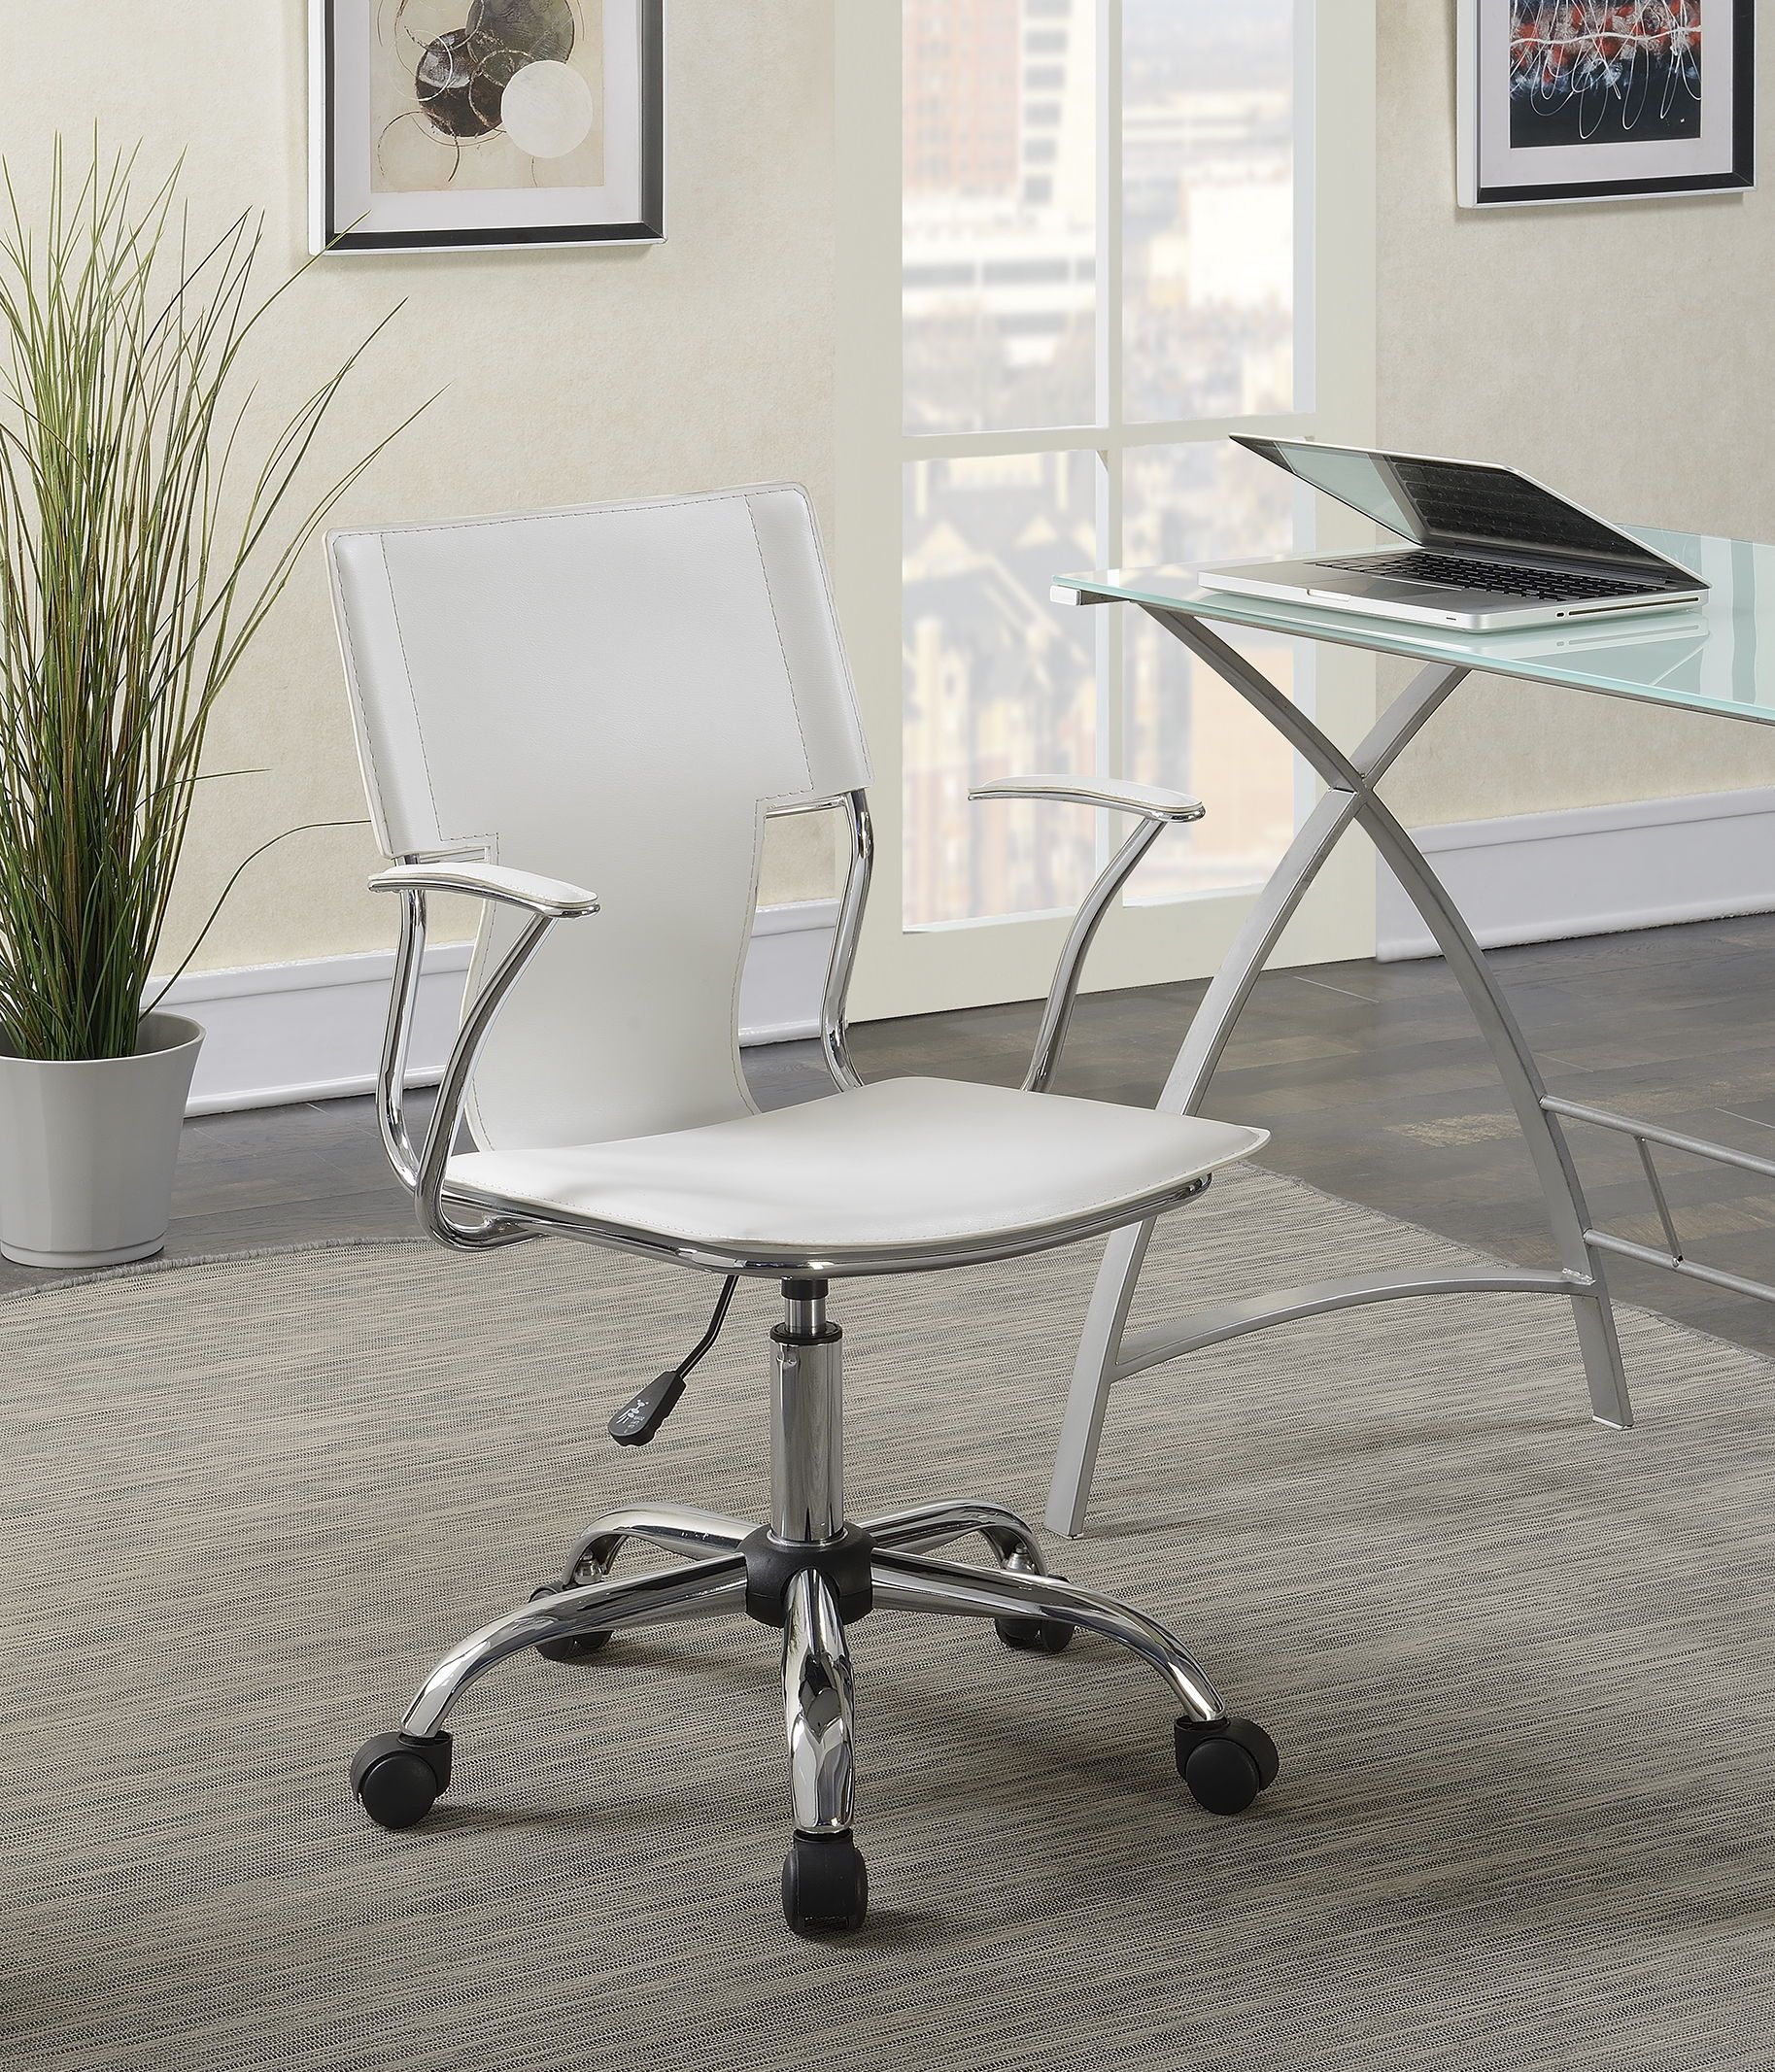 Adjustable Height Office Chair - White And Chrome